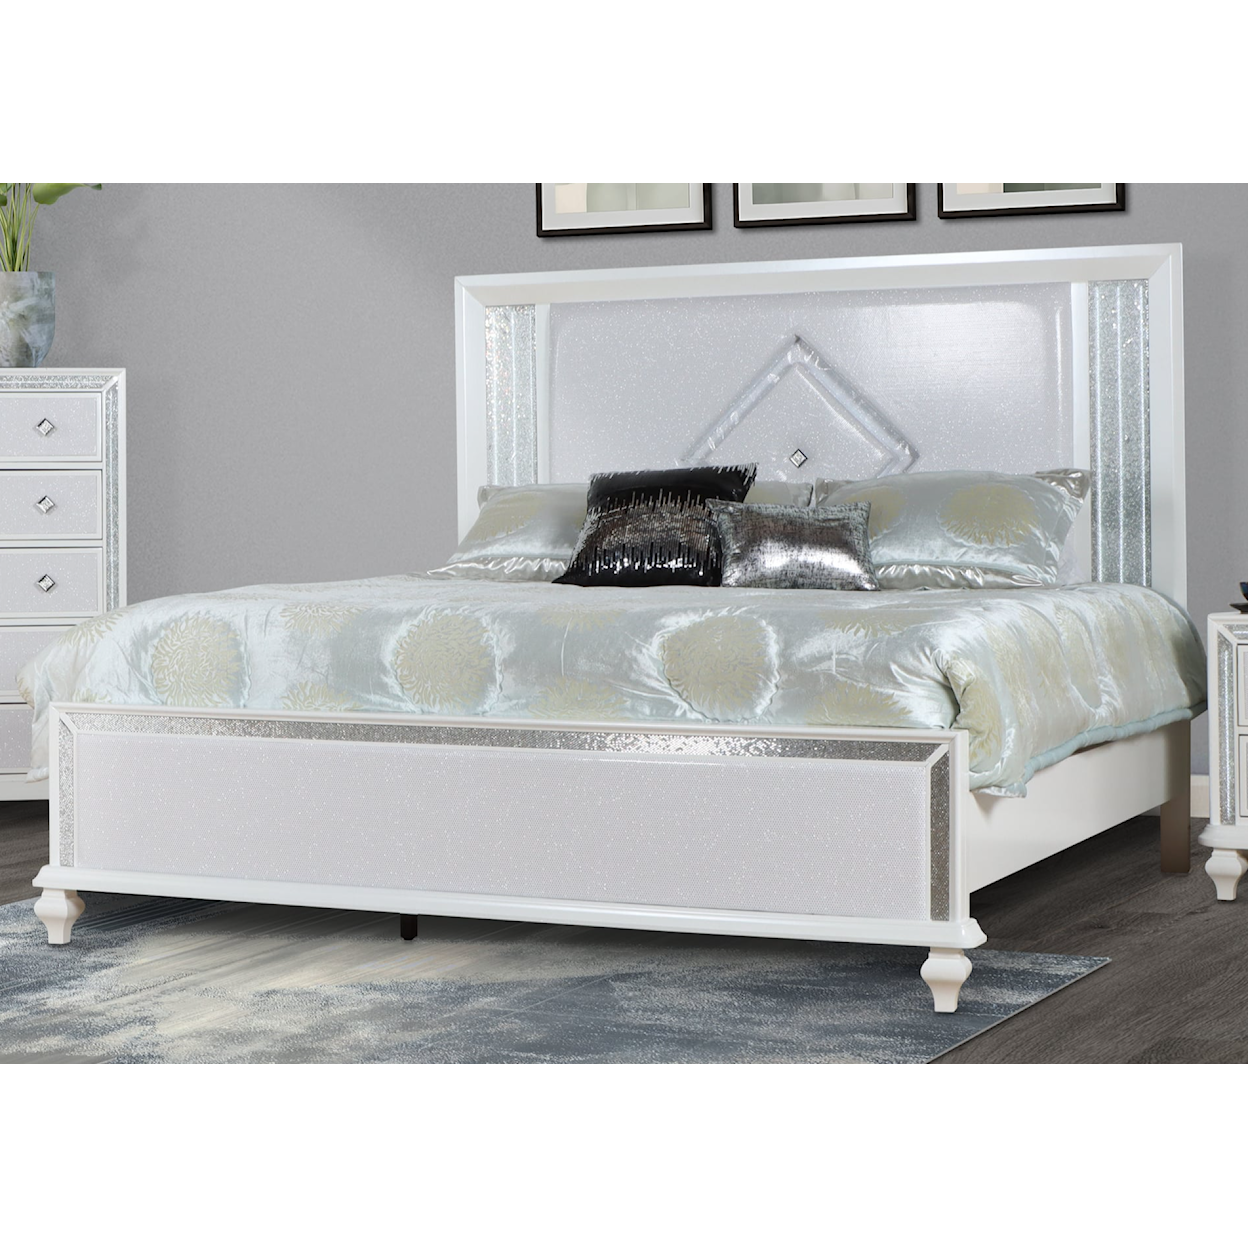 New Classic Furniture Stardust King Bed